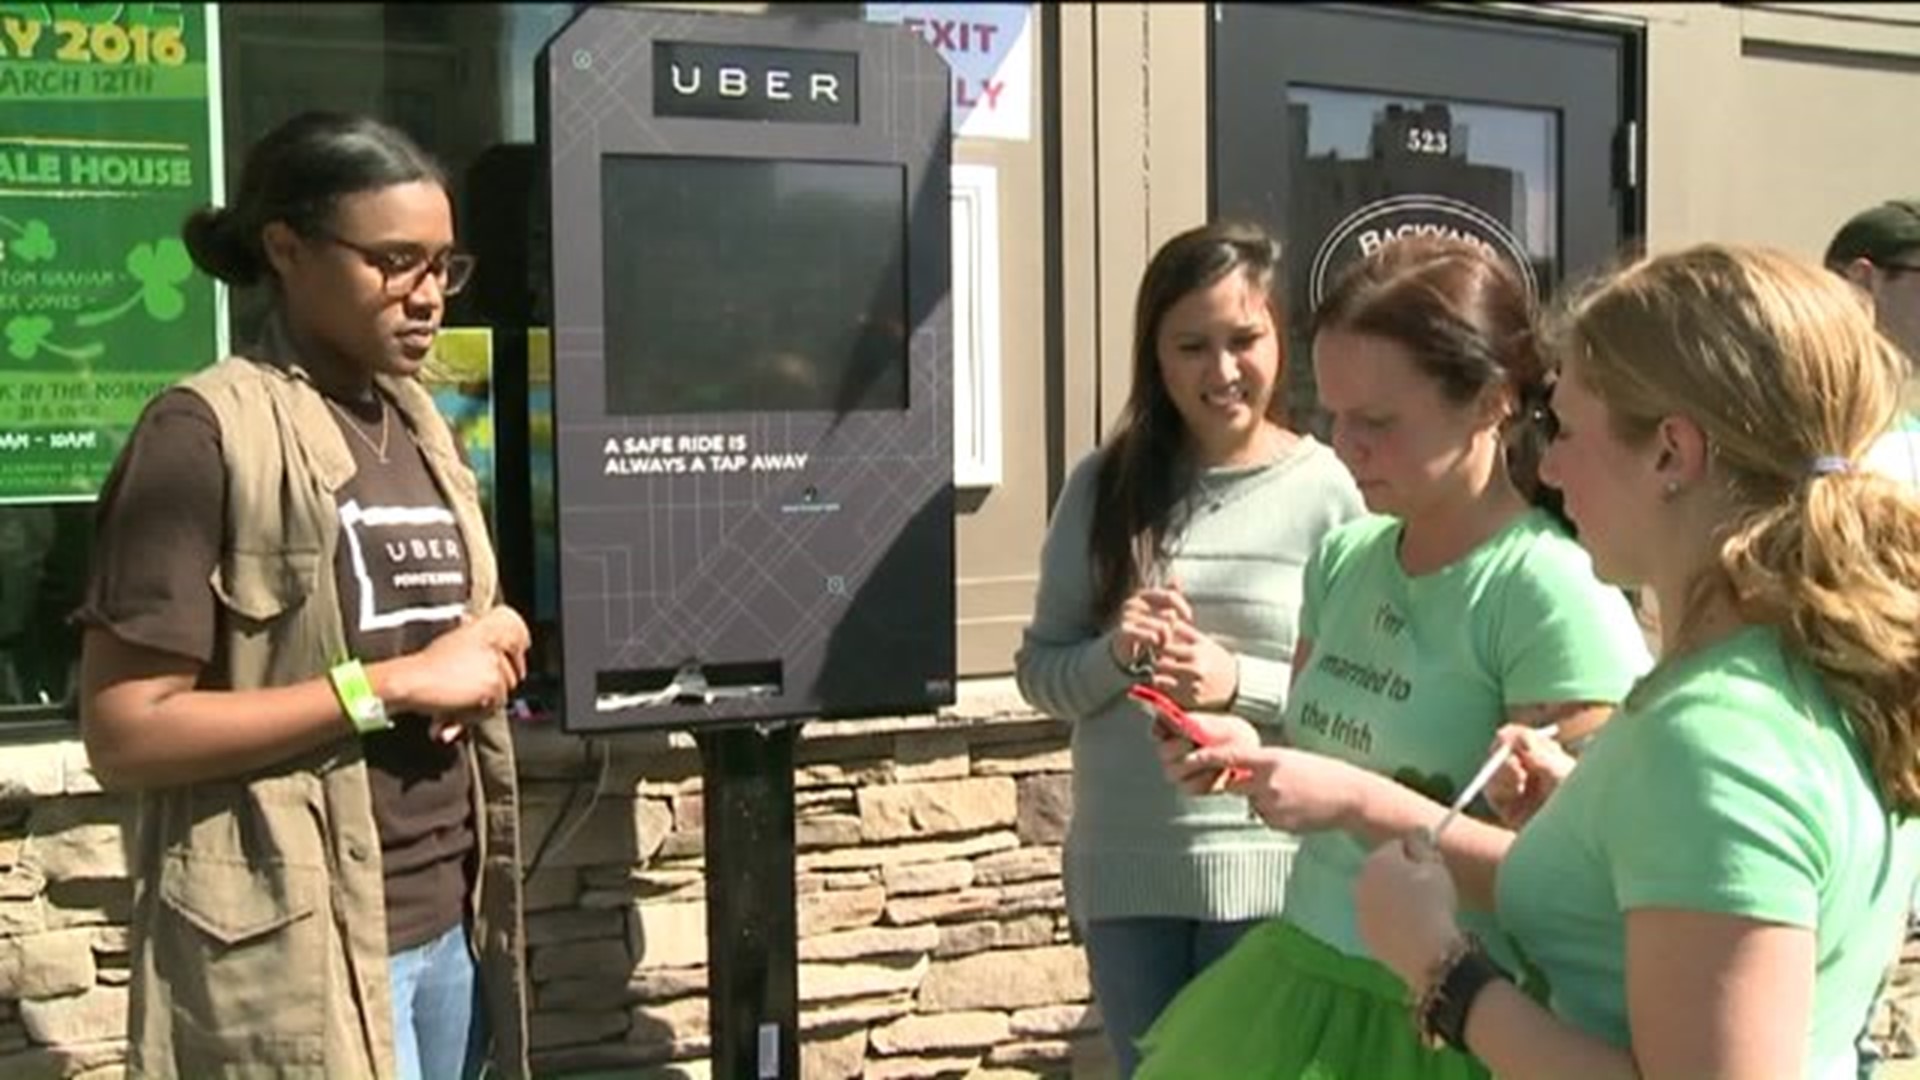 Uber, Backyard Ale House Team Up to Offer Free Rides on Parade Day in Scranton